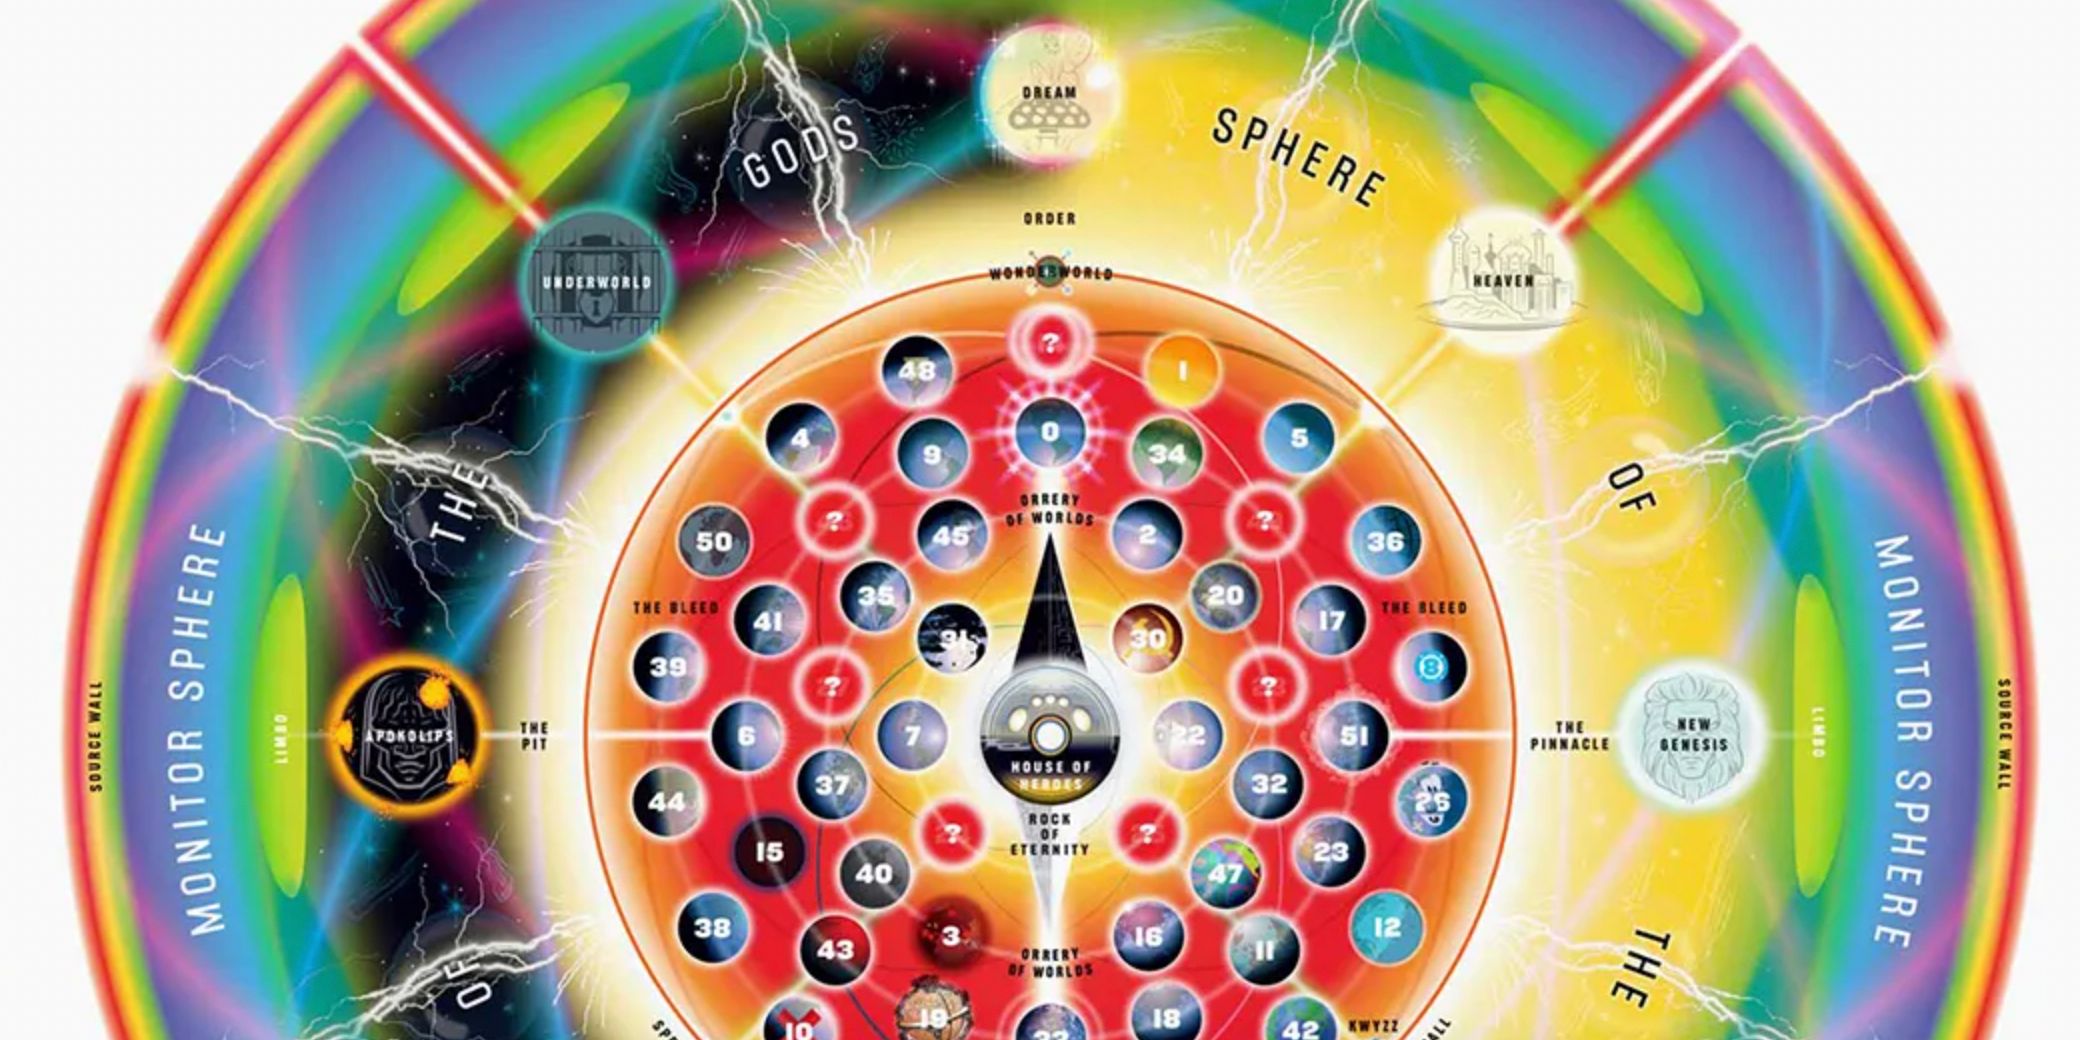 The Grant Morrison design of the spherical DC multiverse